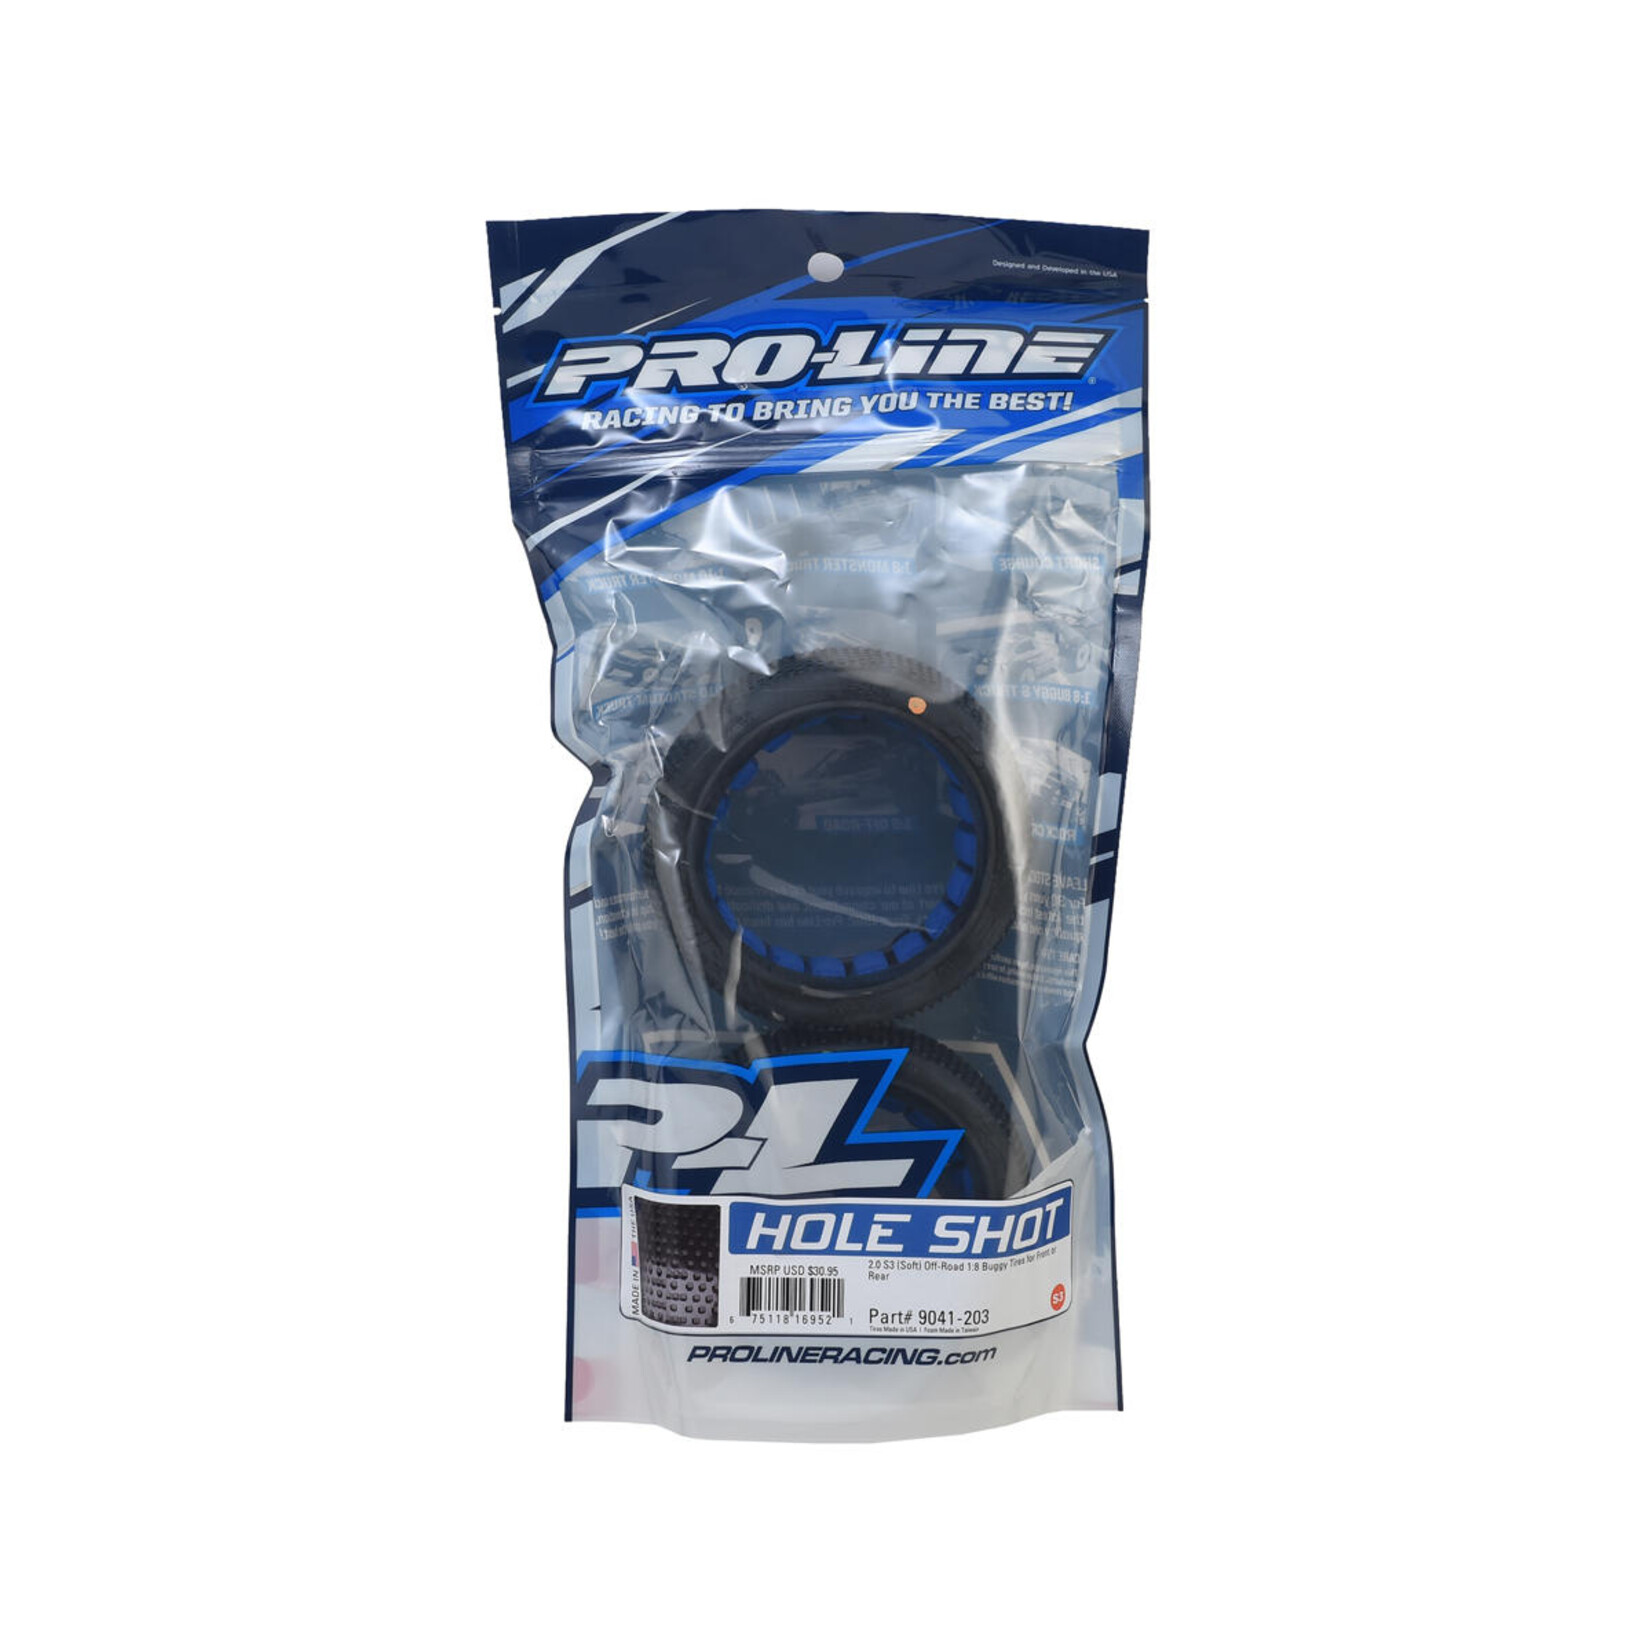 Pro-Line Pro-Line Hole Shot 2.0 1/8 Buggy Tires w/Closed Cell Inserts (2) (S3) #9041-203